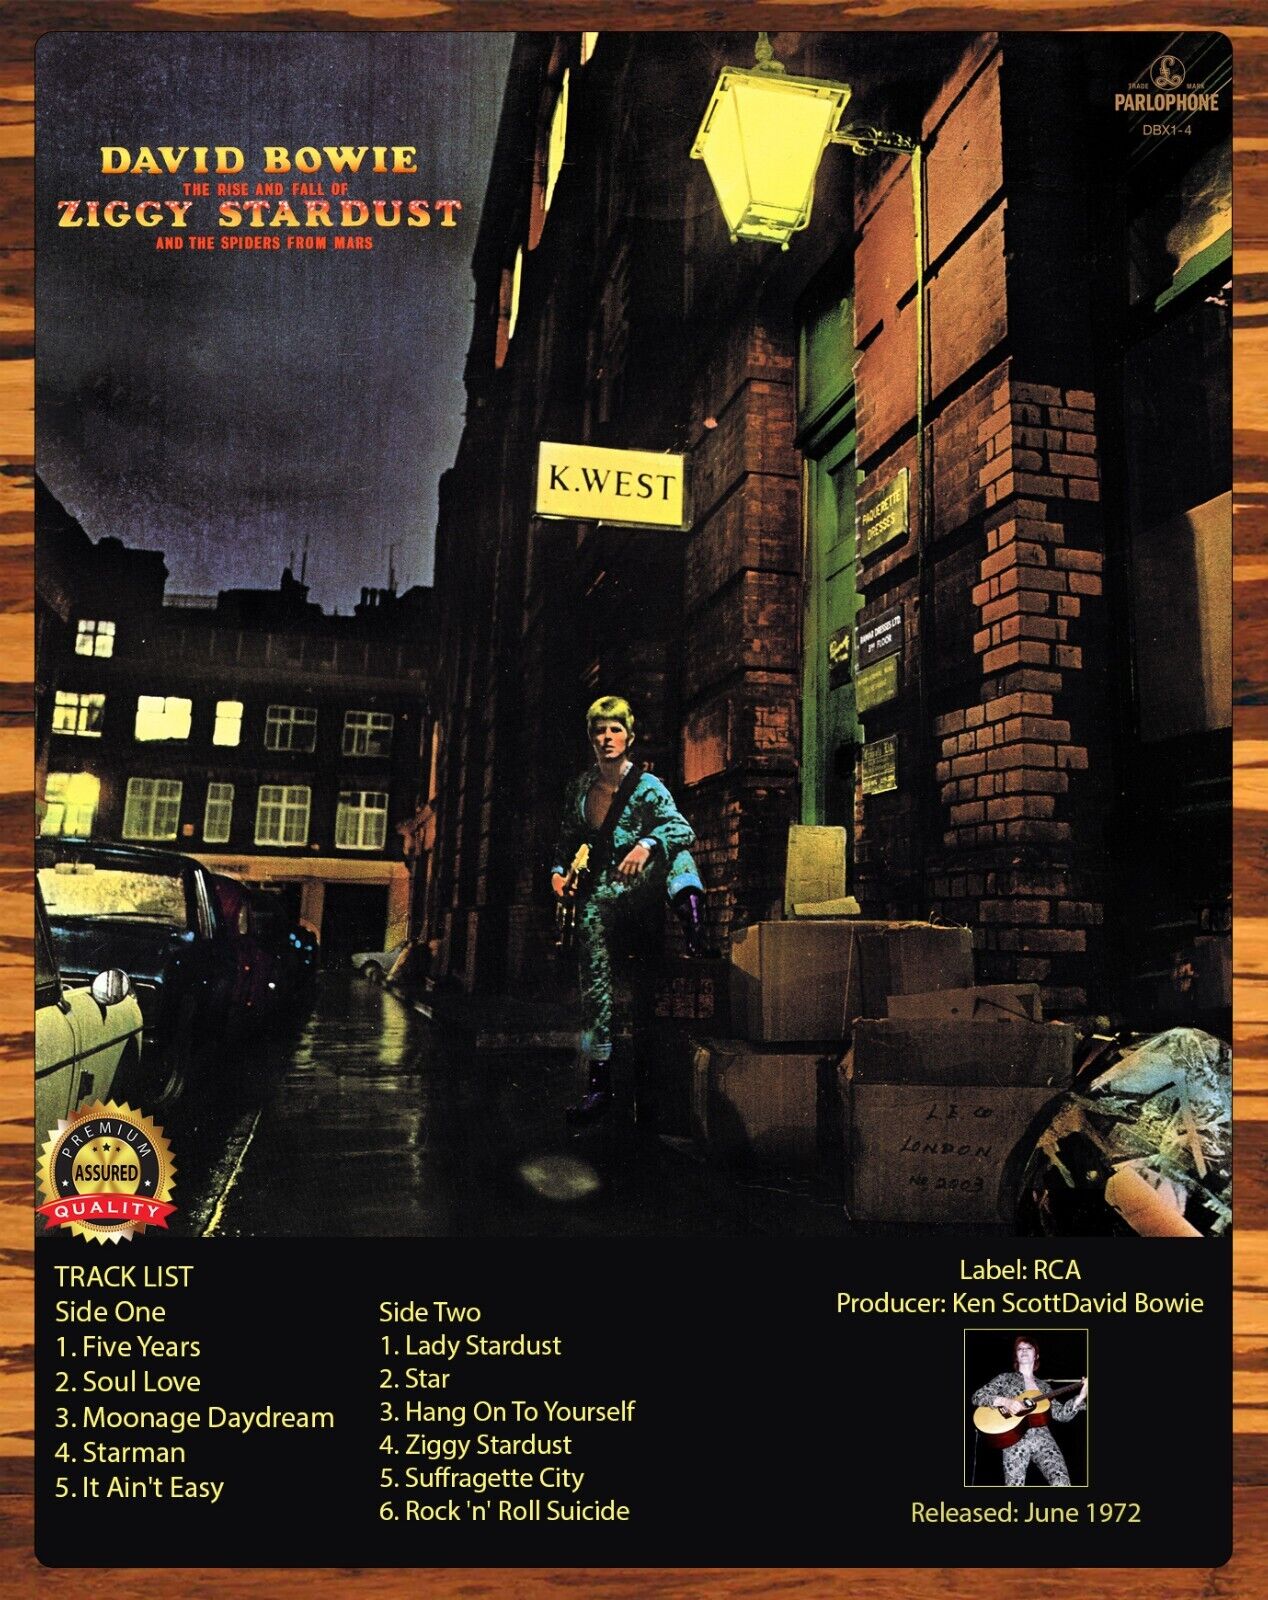 David Bowie - Rise And Fall of Ziggy Stardust - 1972 - Metal Sign 11 x 14